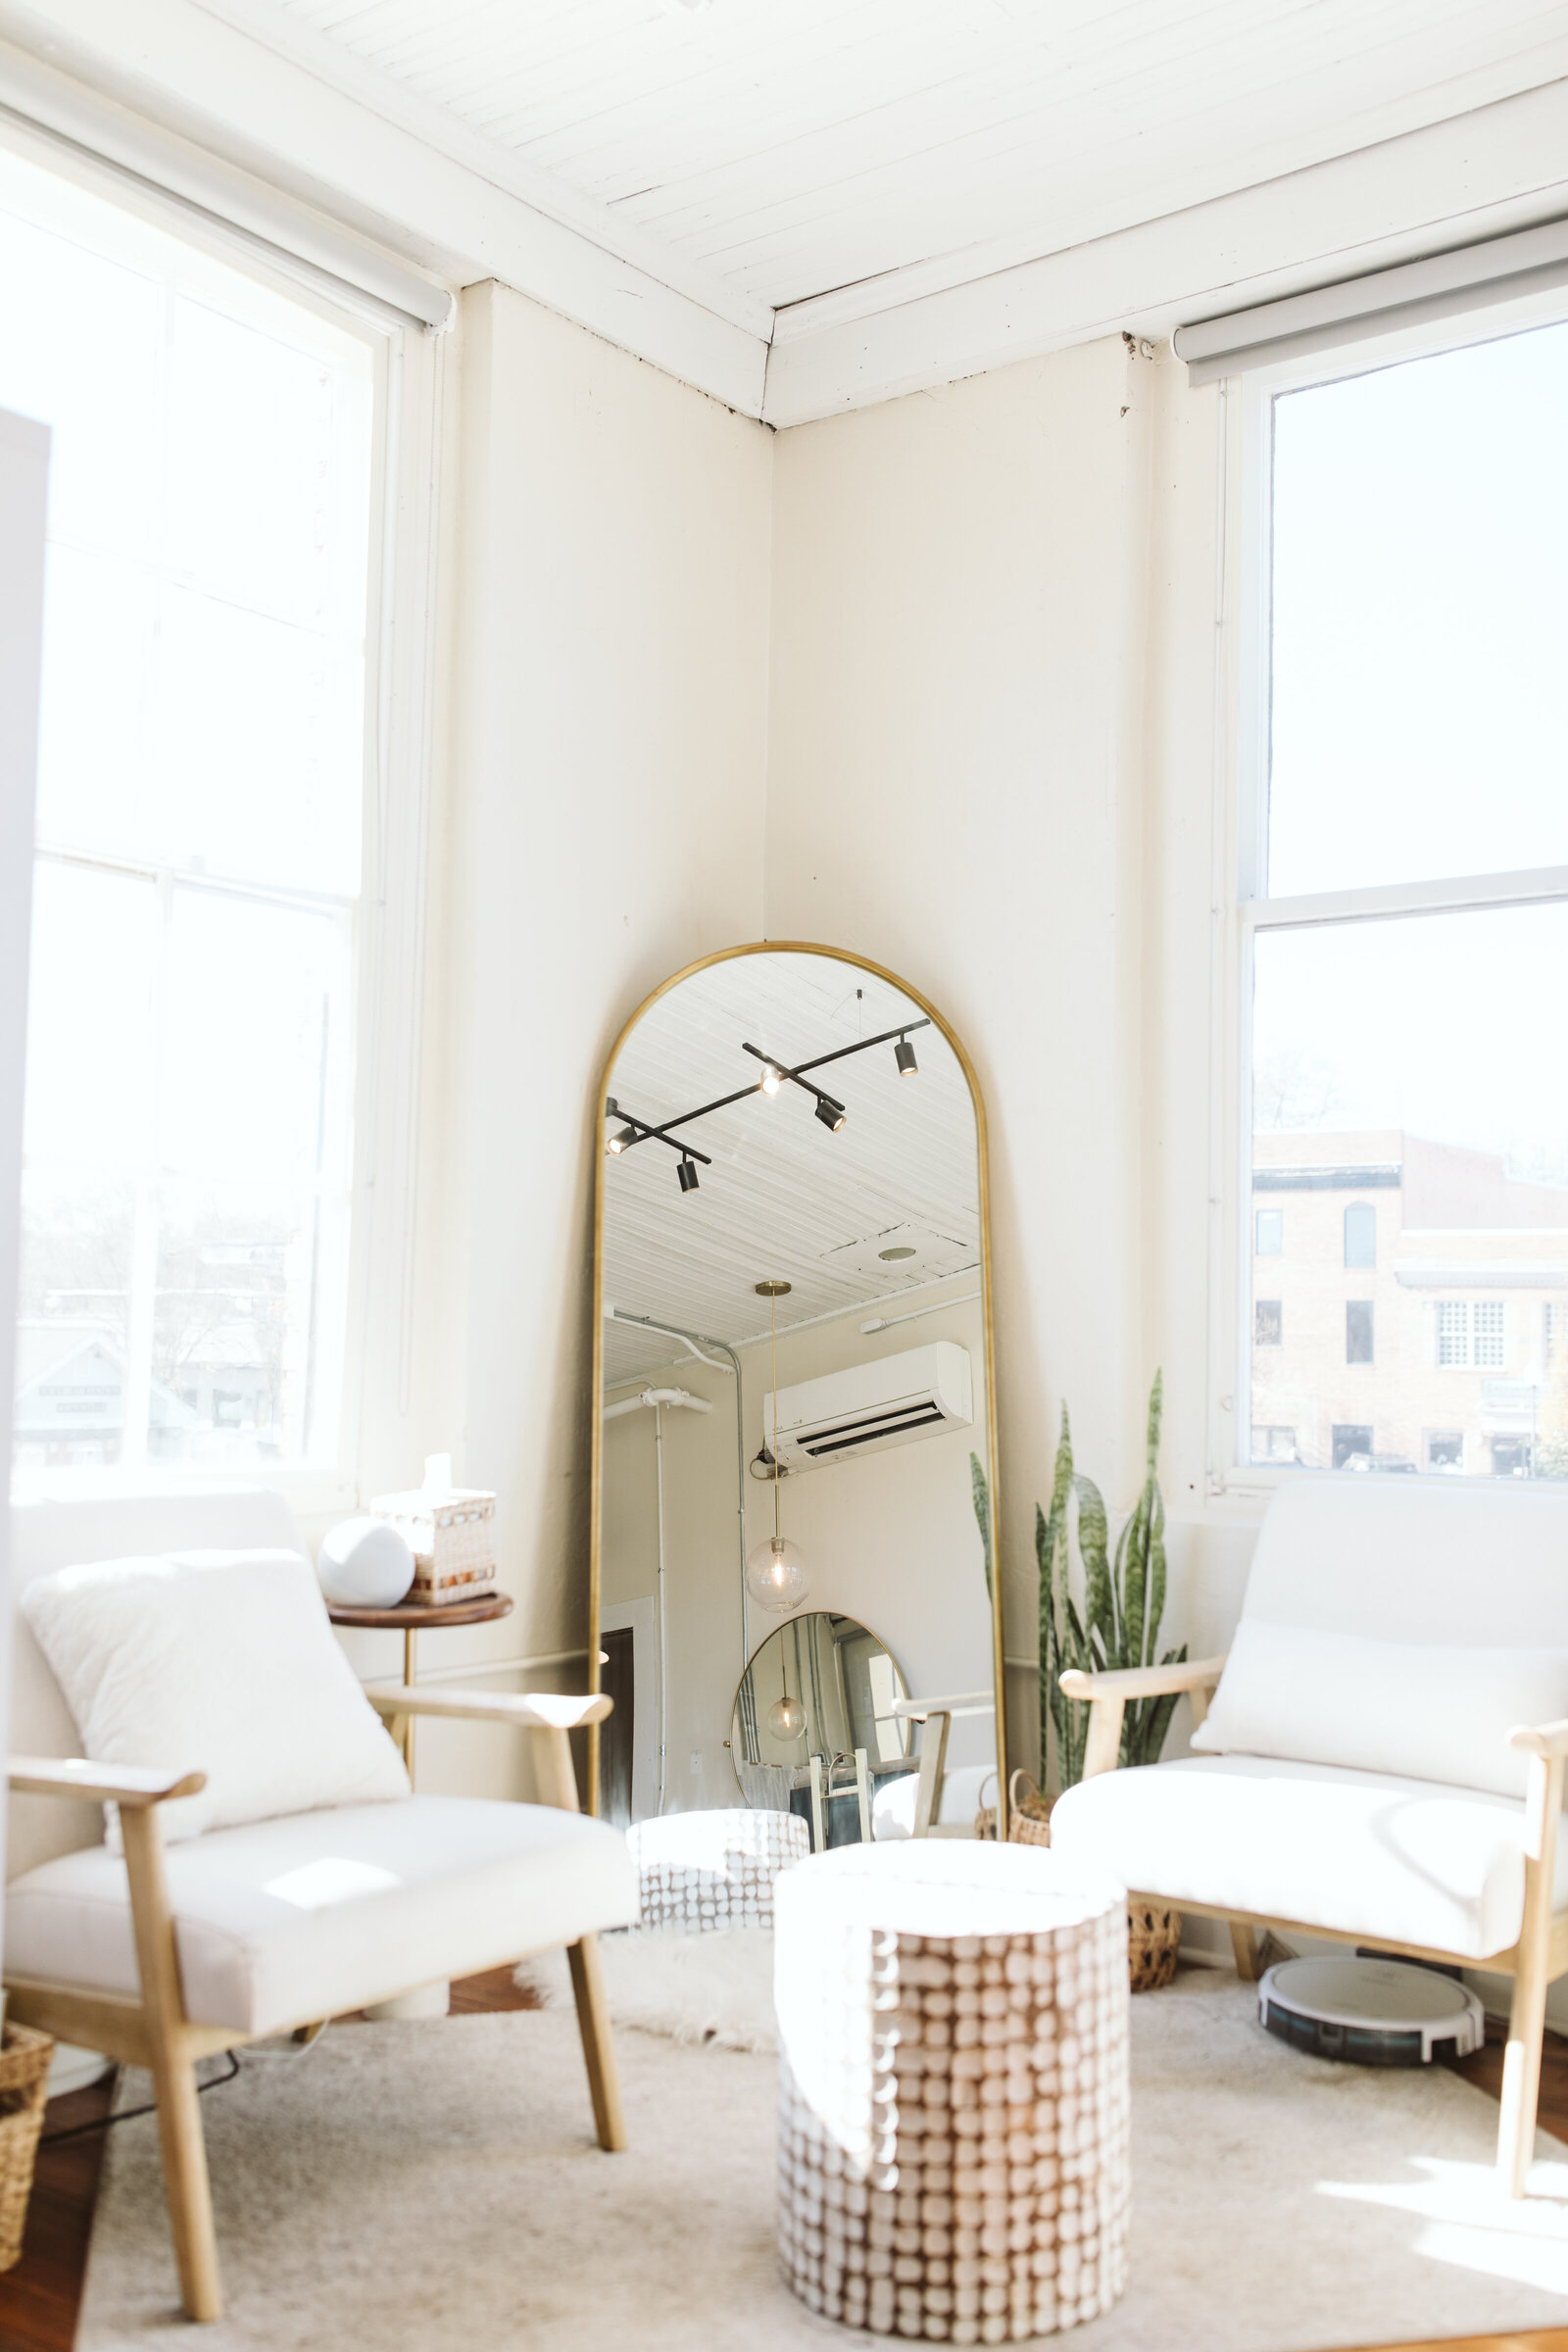 Bright hair salon interior with cozy armchairs, wooden floors, and a large arched mirror reflecting a serene atmosphere